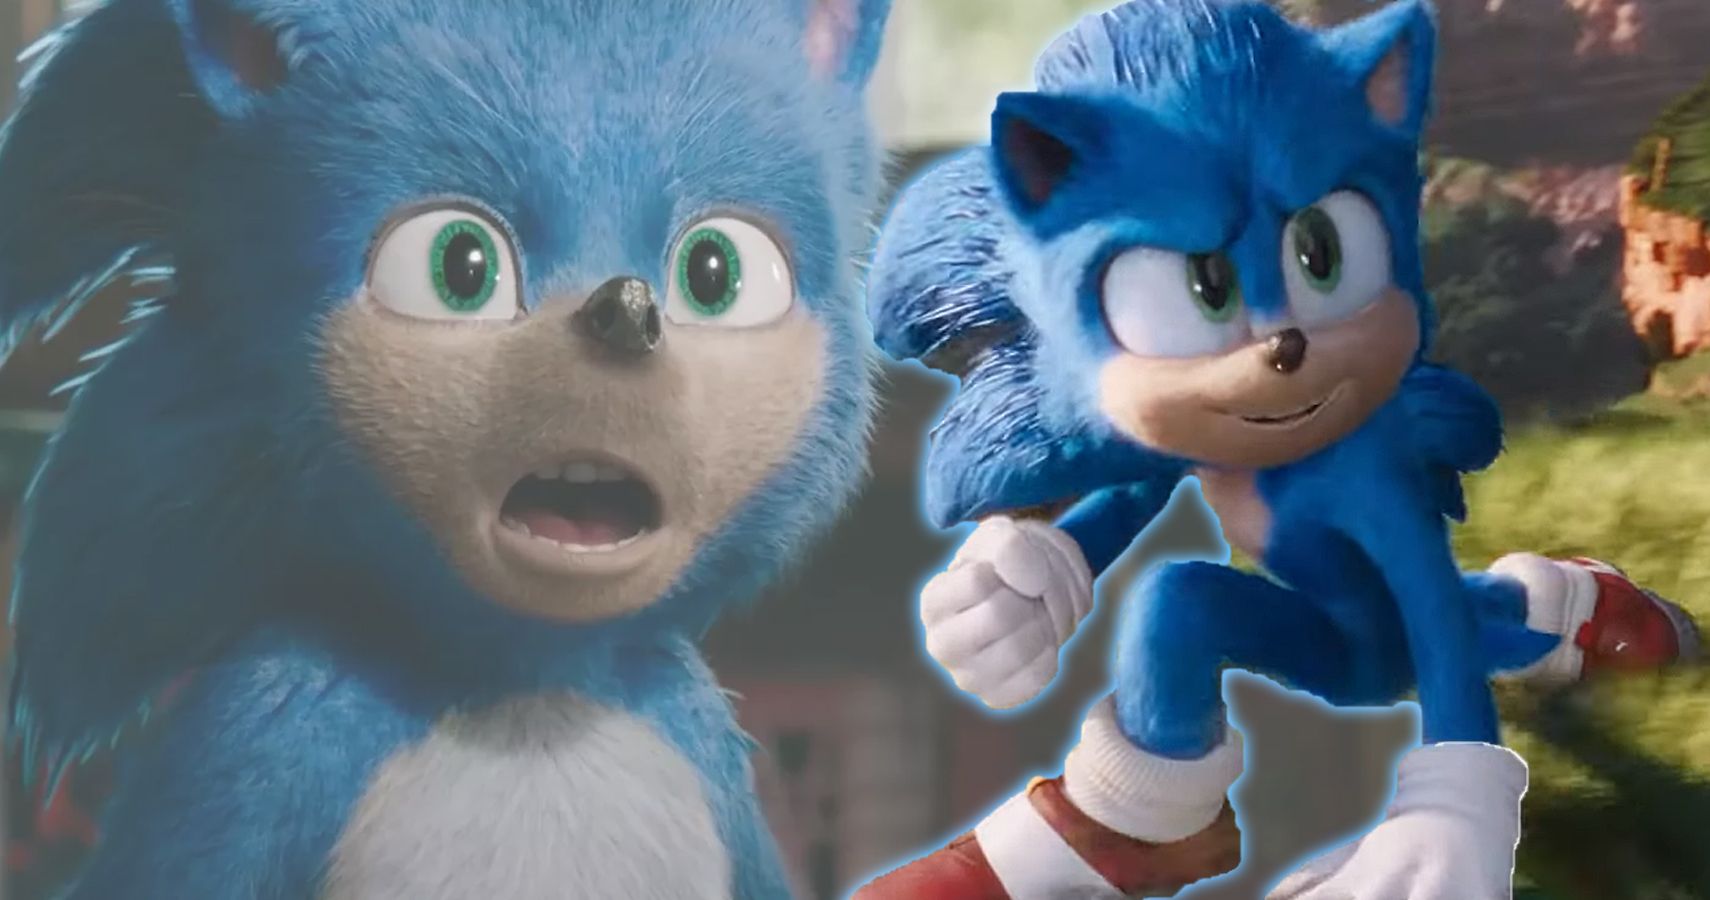 Sonic The Hedgehog Every Single Change Theyve Made With The Character